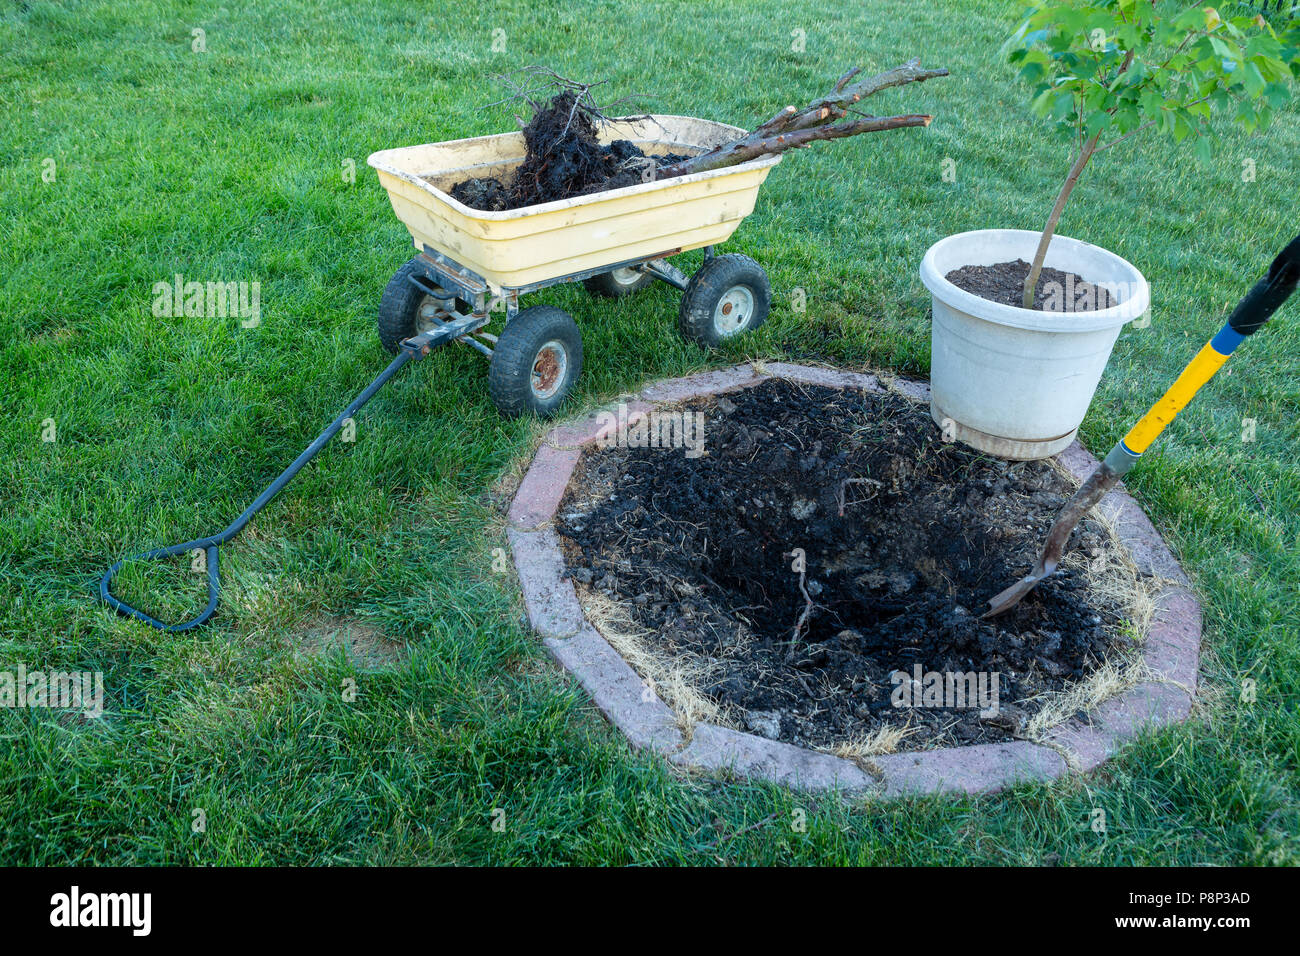 Backyard maintenance removing dead plants with a small tree dug up from a round flowerbed in grass and loaded onto a wheelbarrow ready to plant a new  Stock Photo